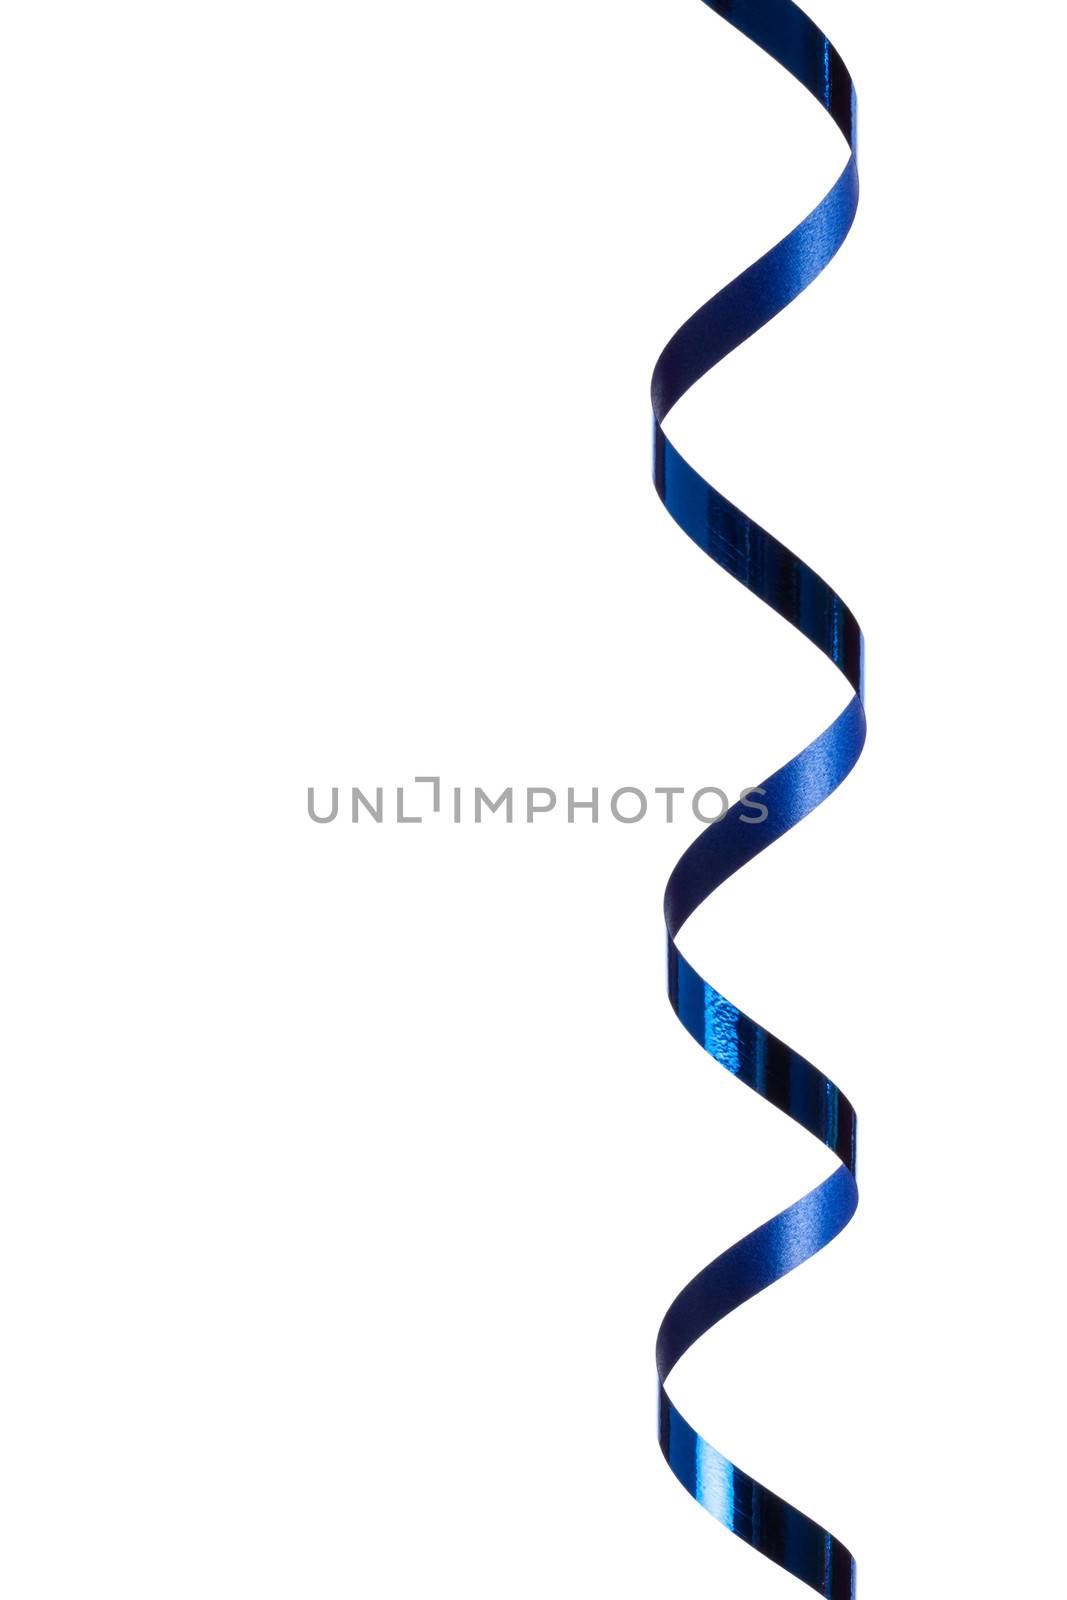 photo of a Blue streamer isolated on white backround